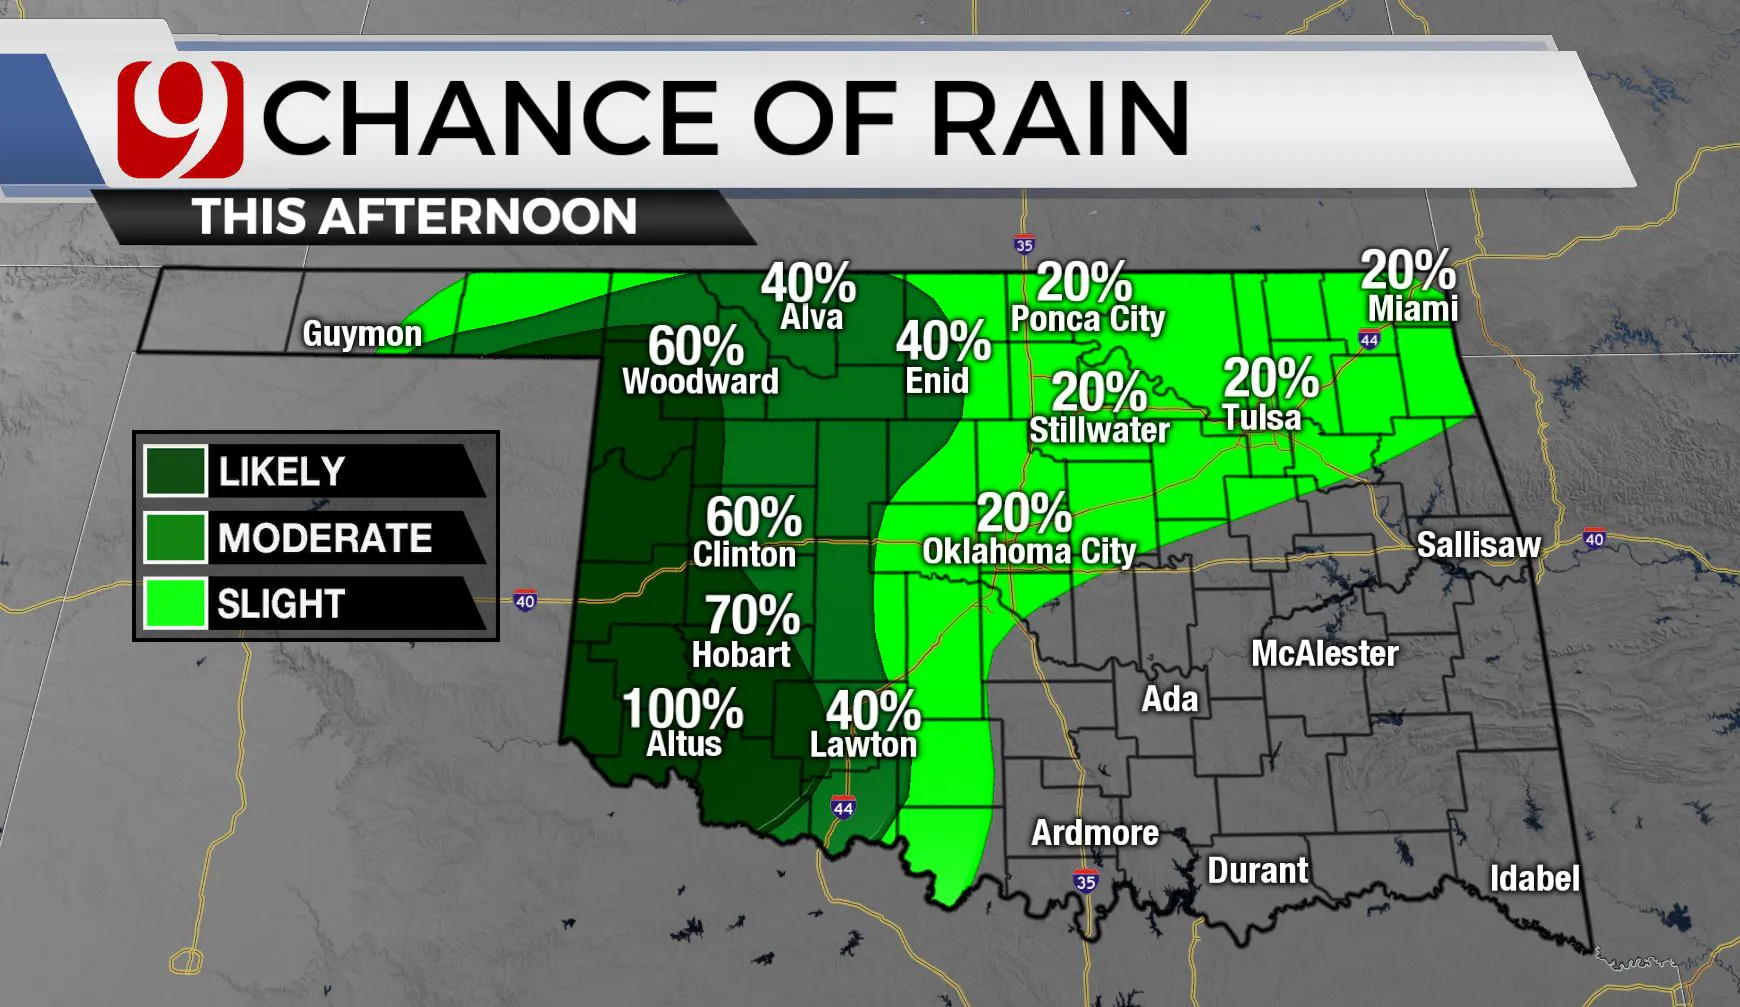 Chances of rain this afternoon.